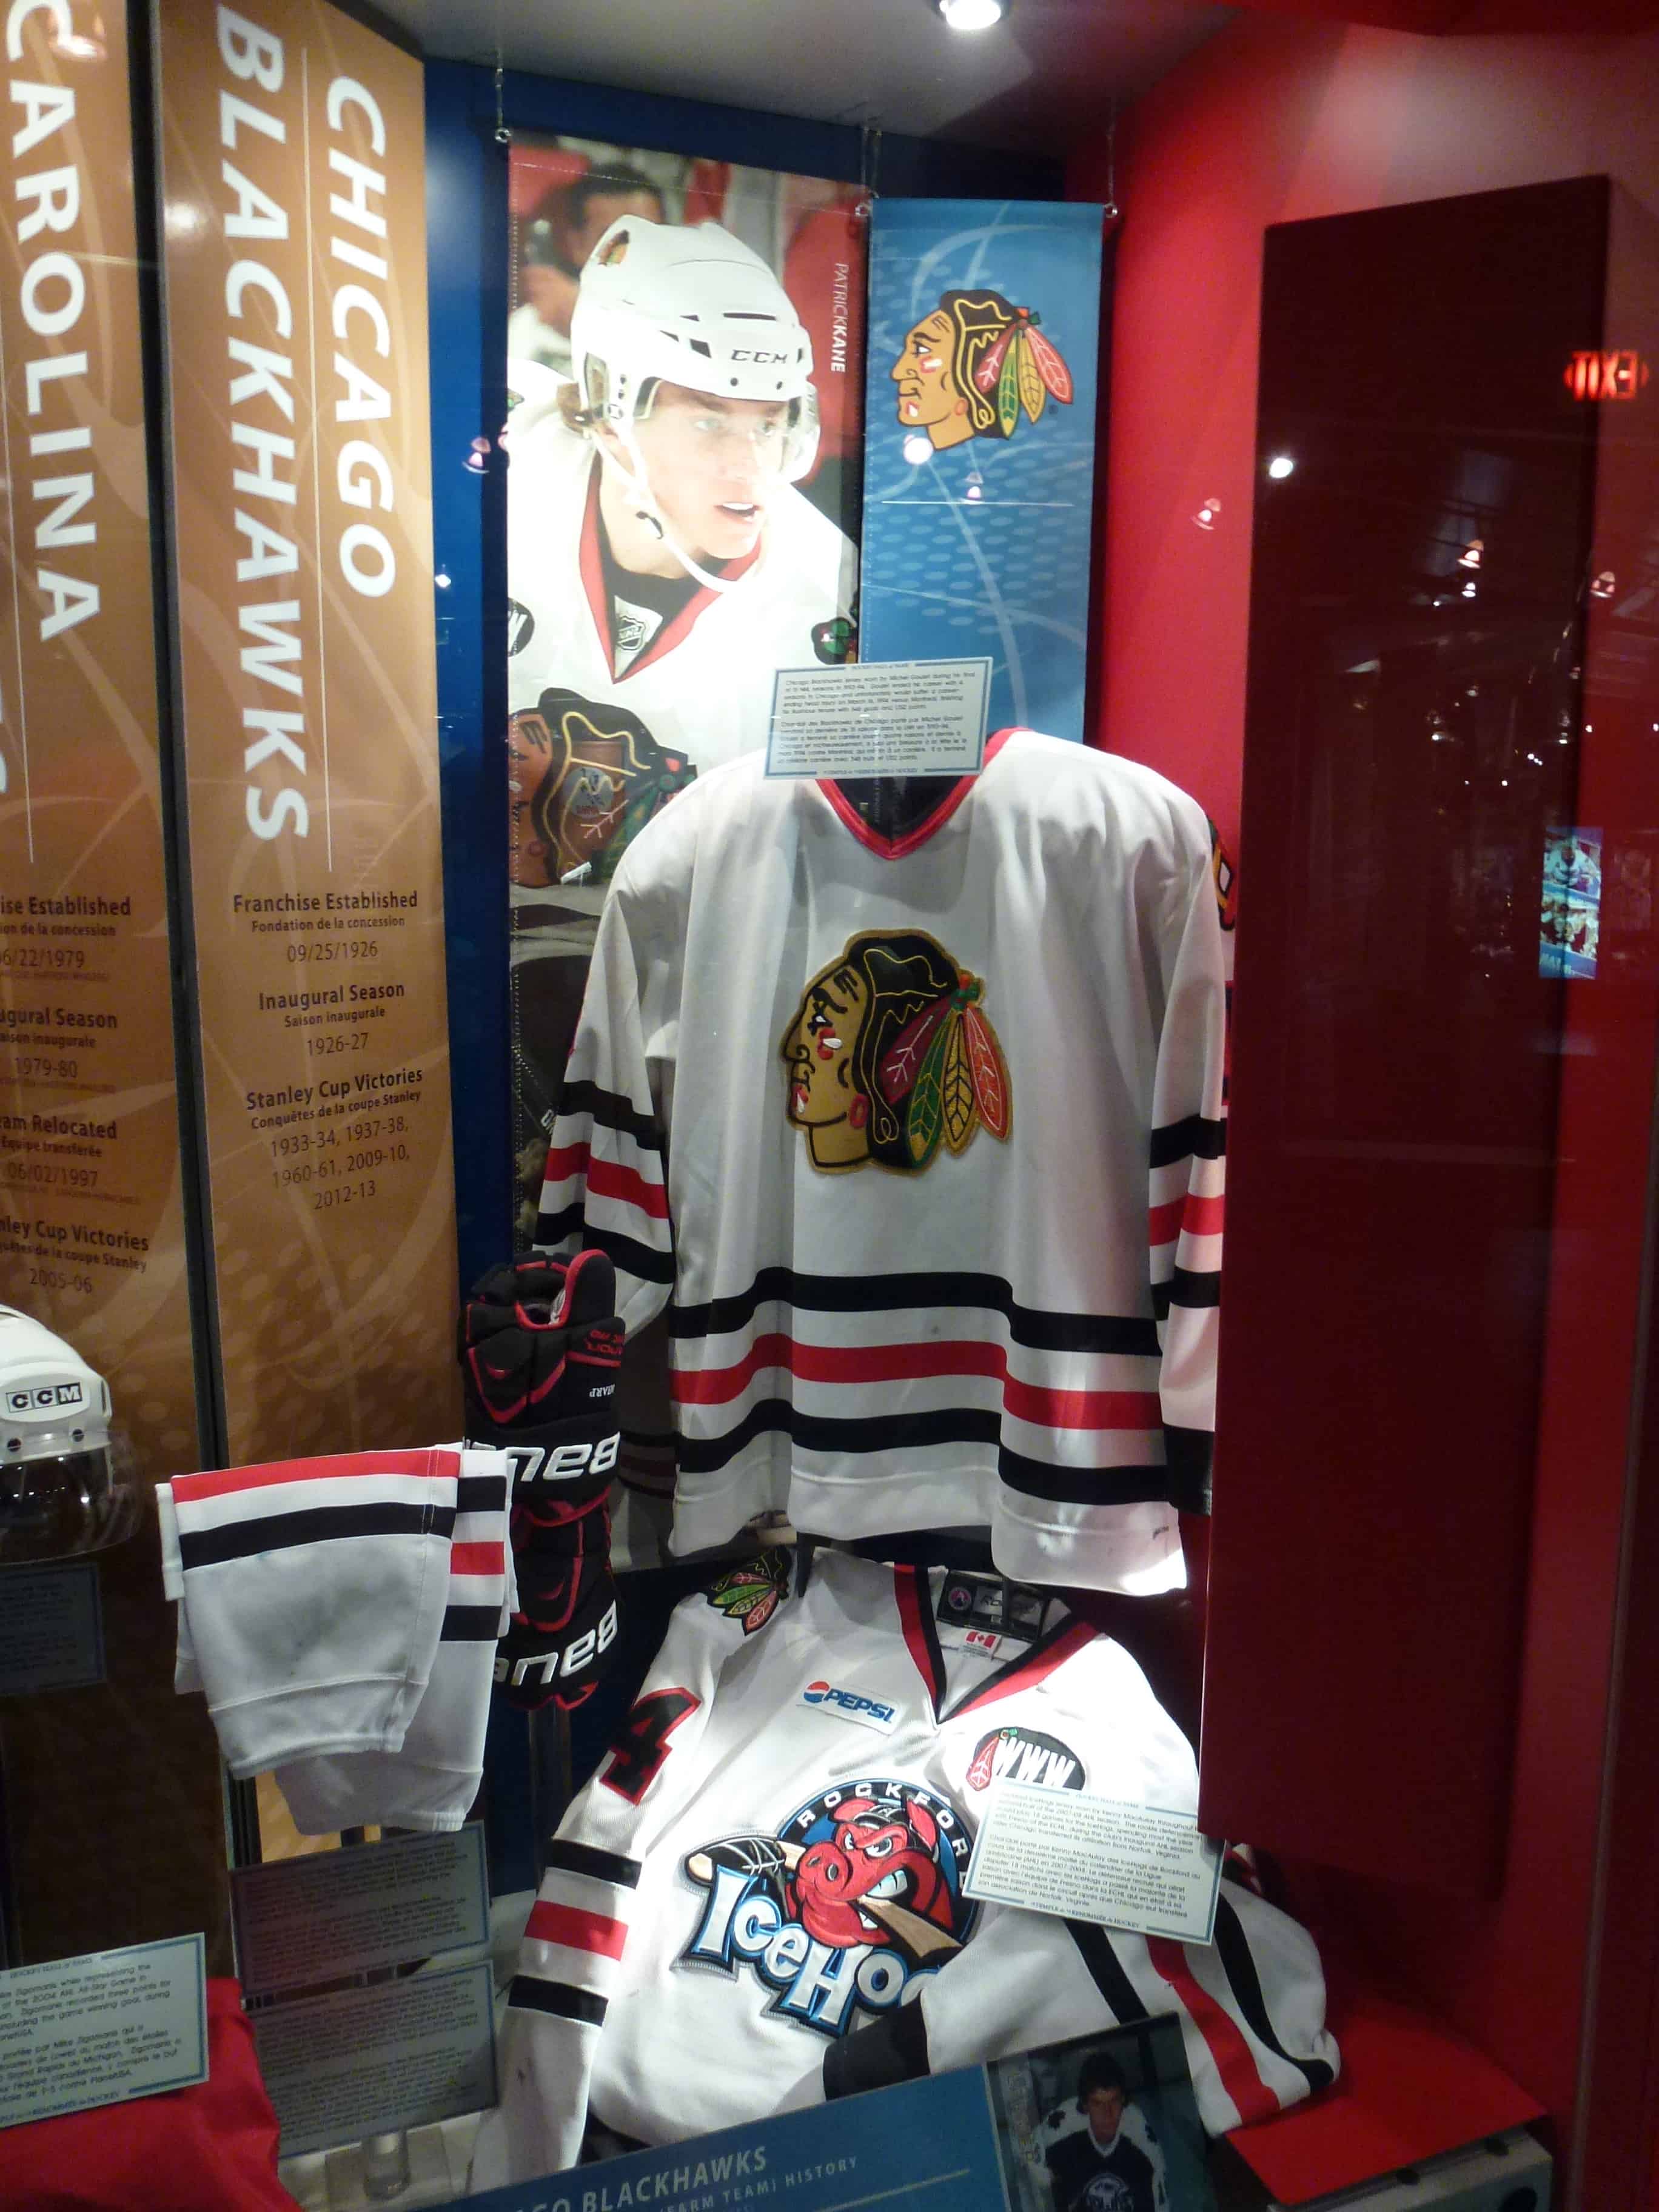 Chicago Blackhawks team display at the Hockey Hall of Fame in Toronto, Ontario, Canada